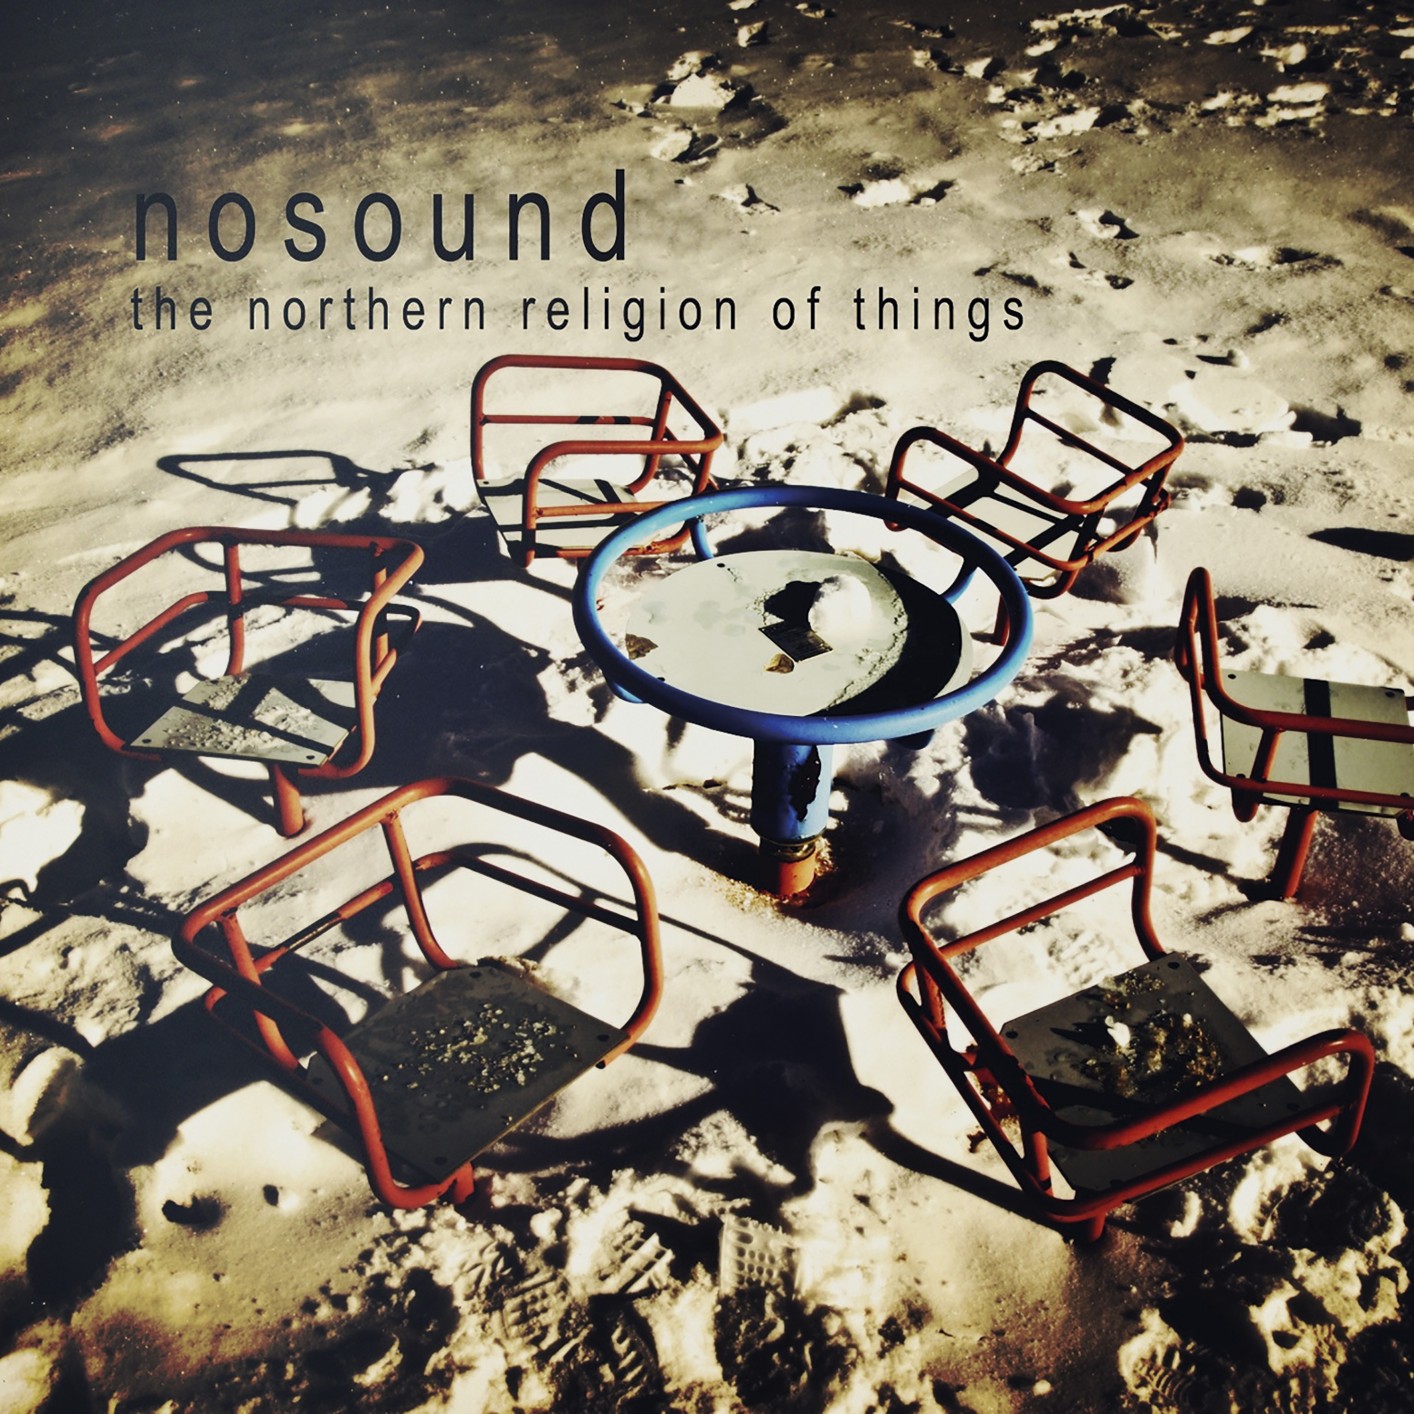 Nosound – The Northern Religion of Things (Remastered) (2011/2019) [FLAC 24bit/44,1kHz]